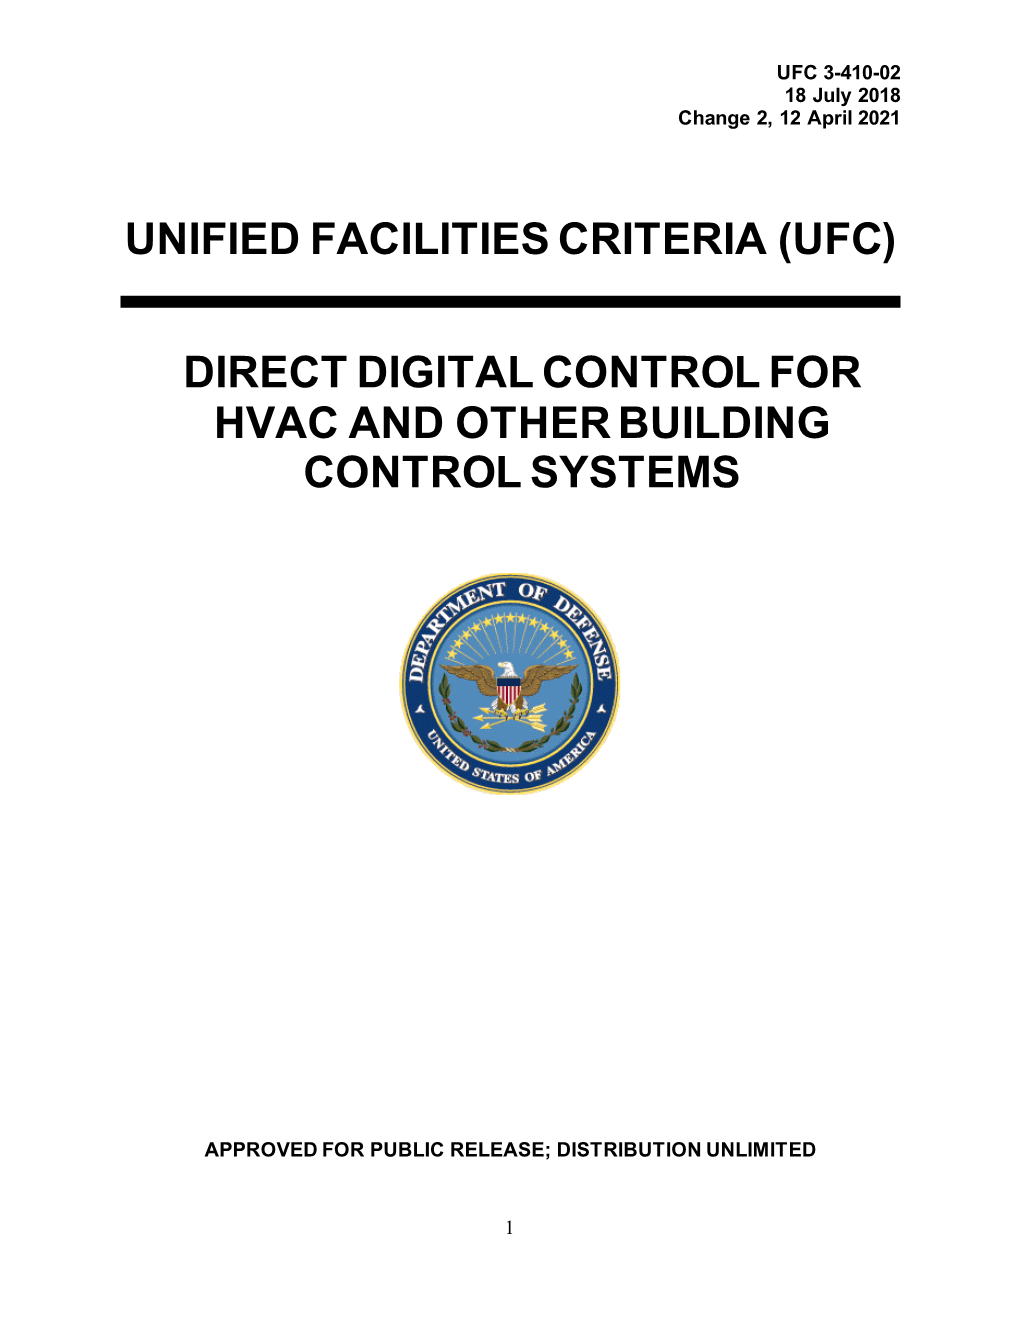 UFC 3-410-02 Direct Digital Control for HVAC and Other Building